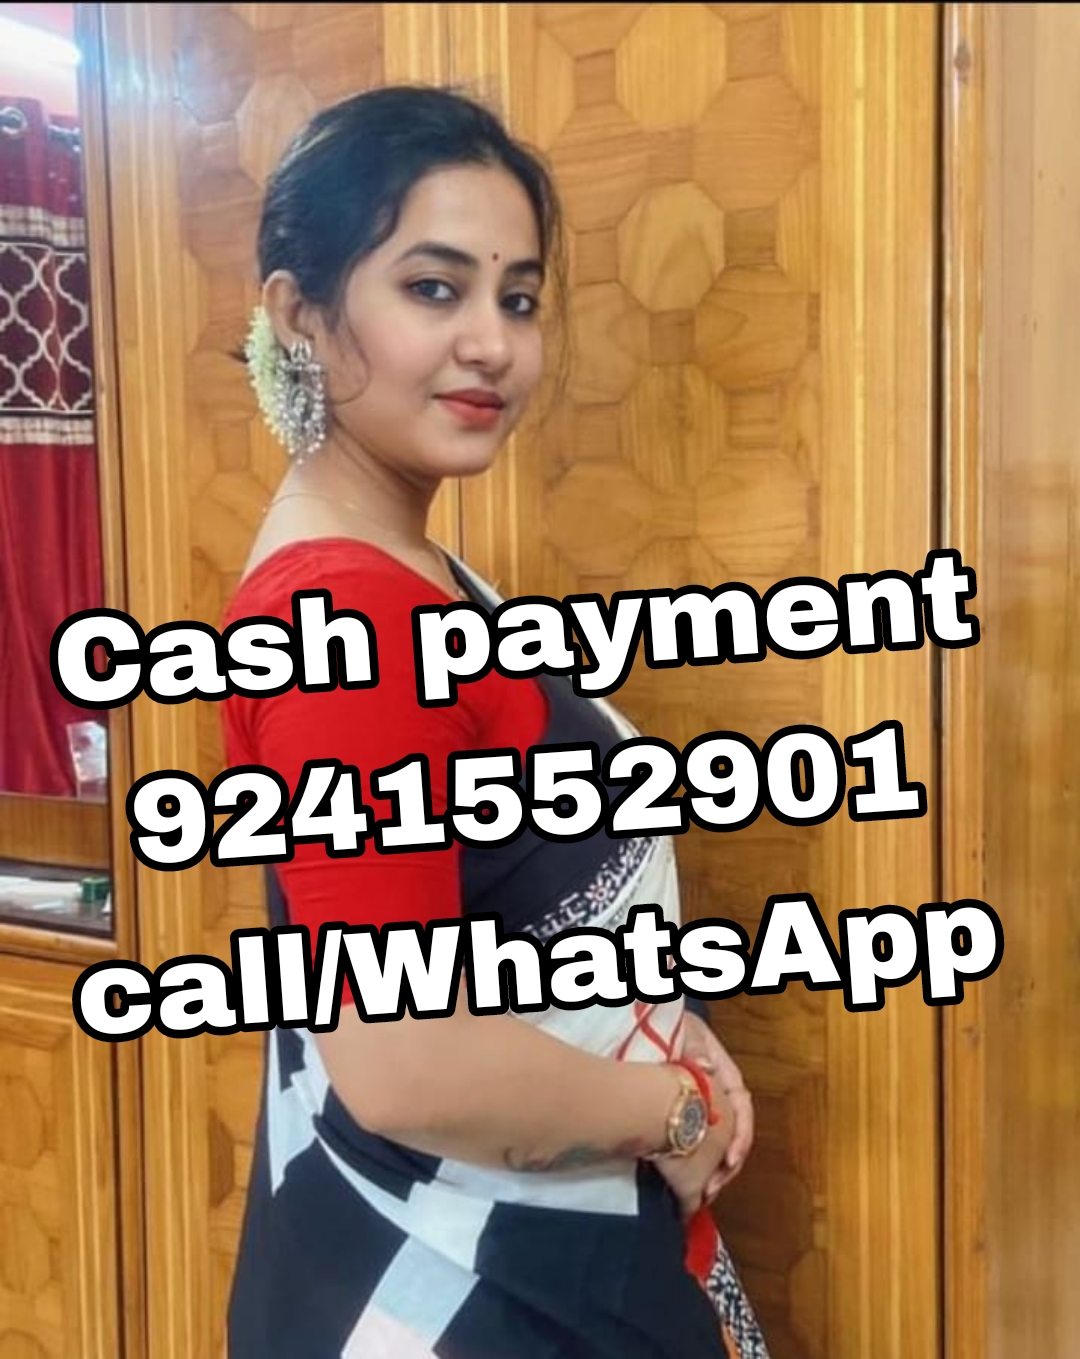 CHILAKALURIPET IN VIP CALL GIRL FULL TRUSTED GENUINE SERVICE AVAILABLE